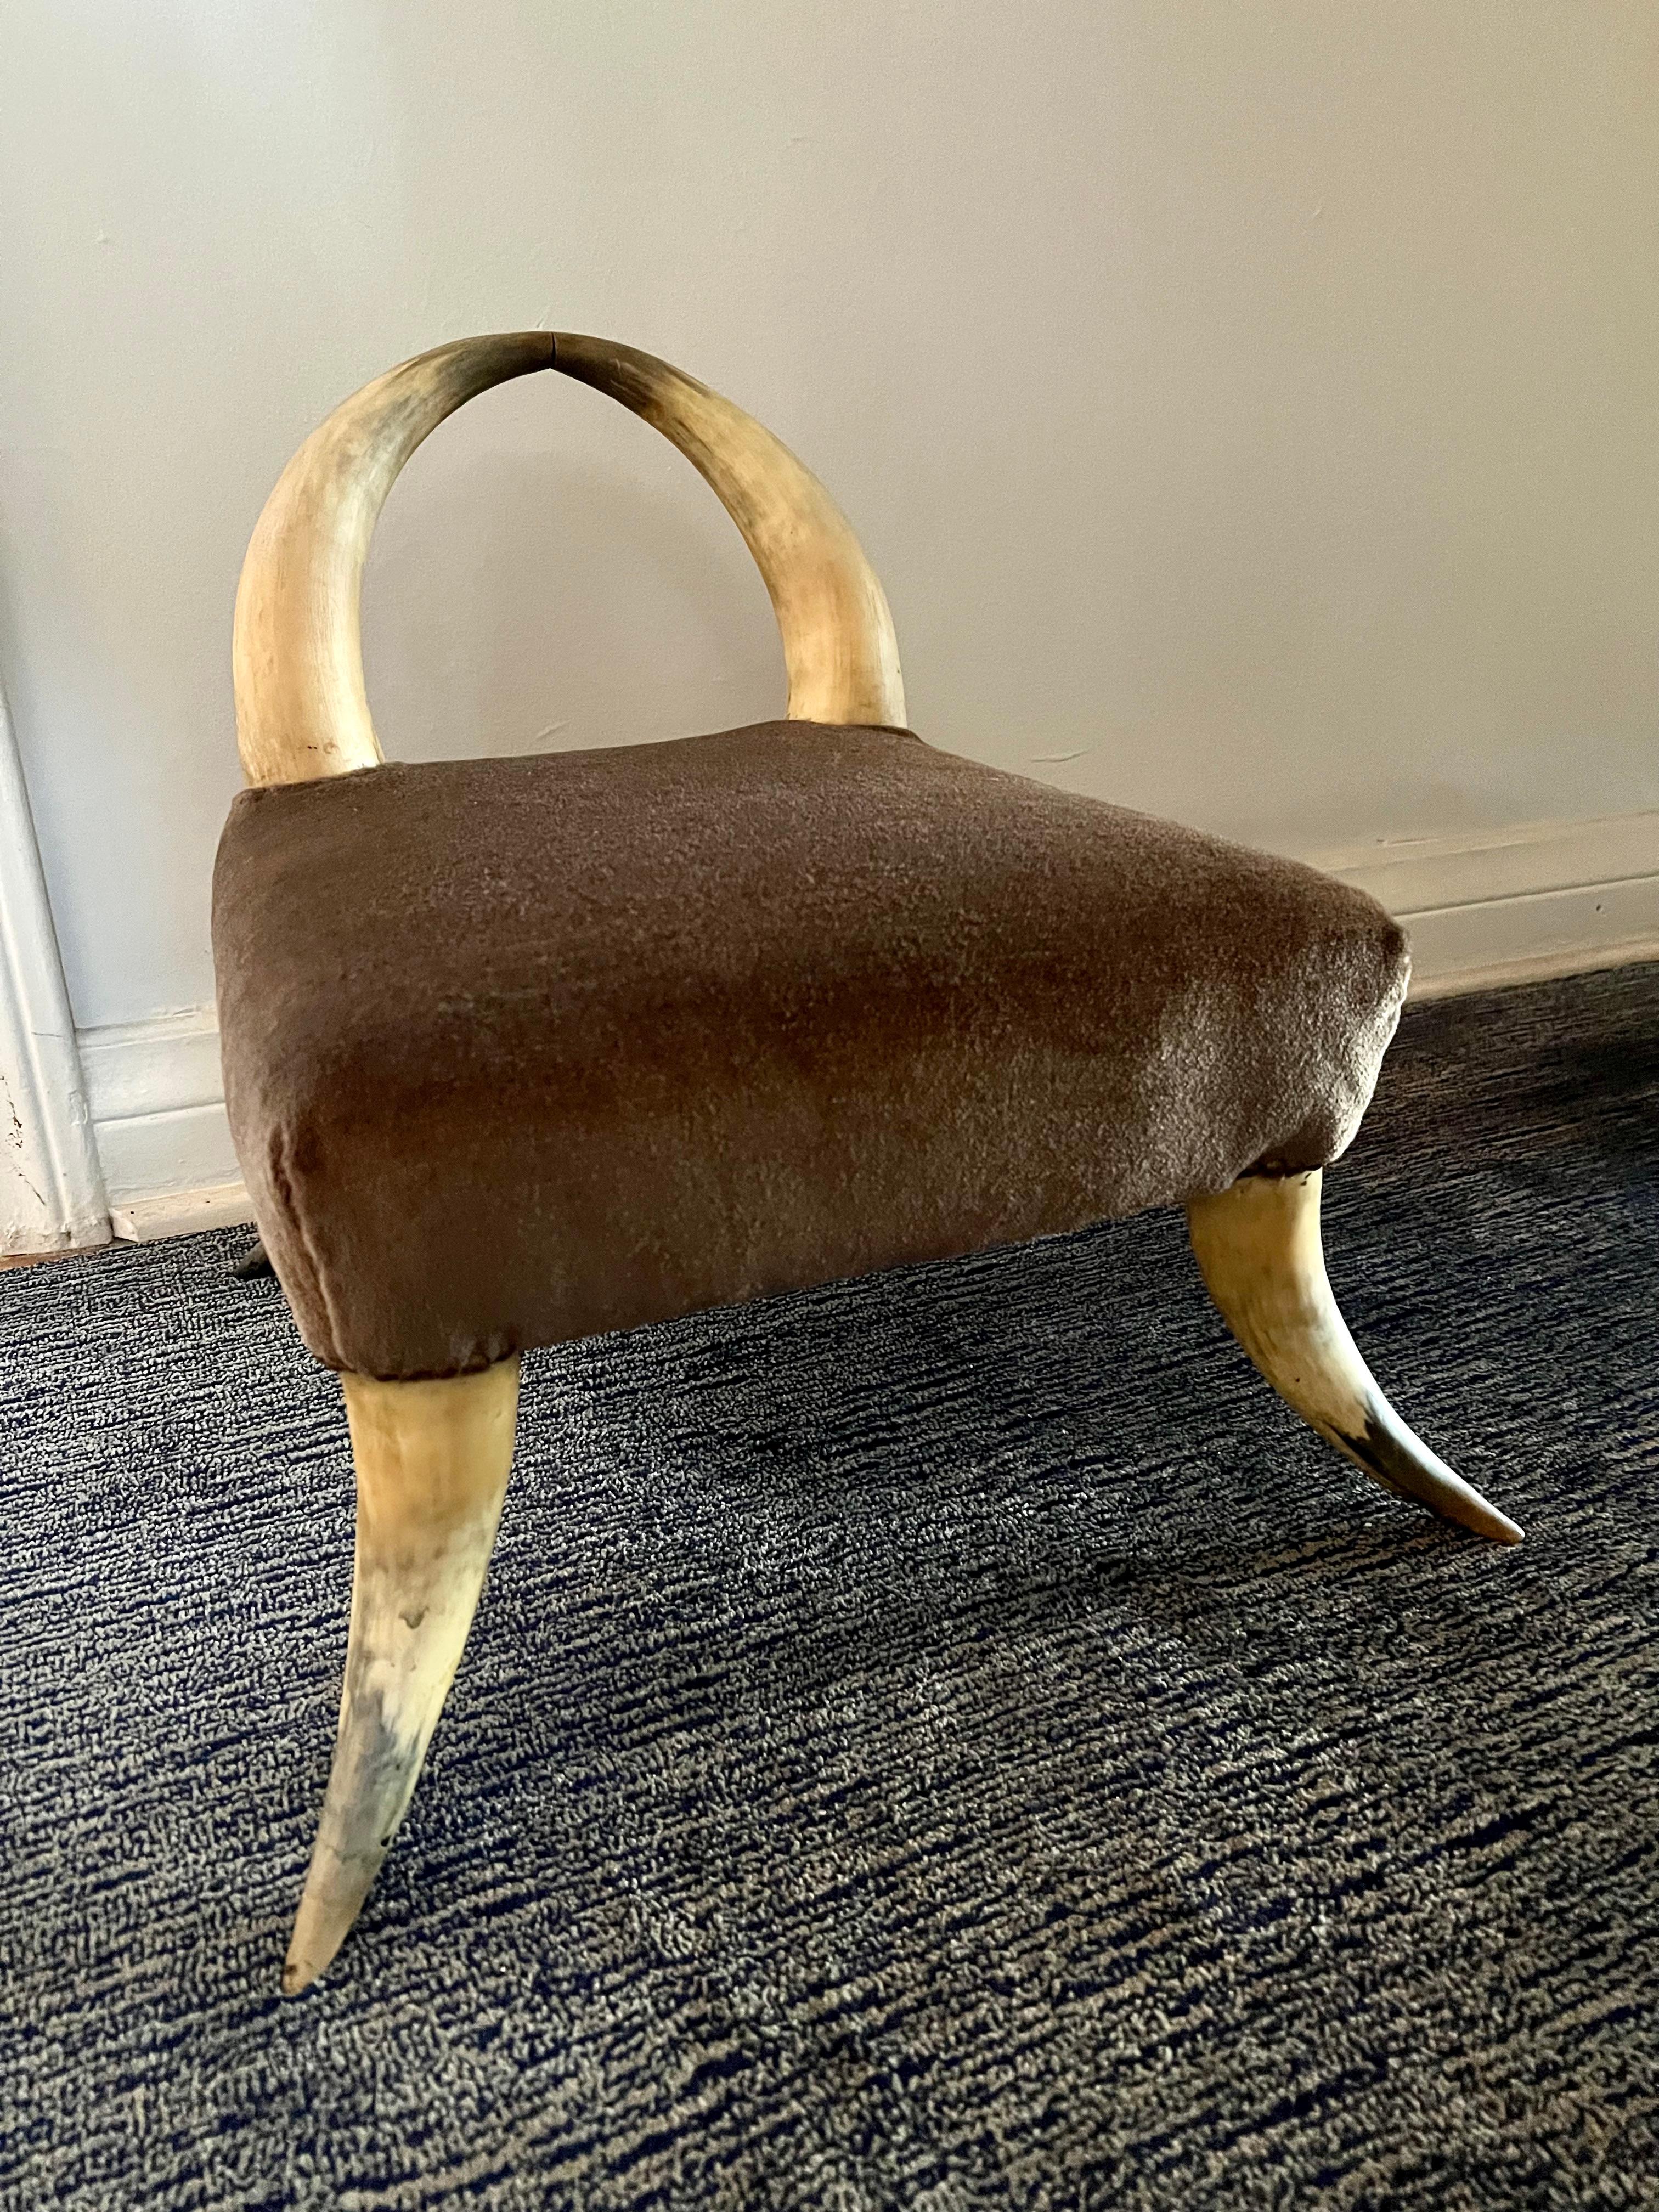 A wonderful foot stool in the style of Ralph Lauren - a compliment to any organic or natural environment and perfectly suited to rest ones weary feet. Naturally beautiful in a cabin or rustic setting.

The horn is very sturdy and in good condition